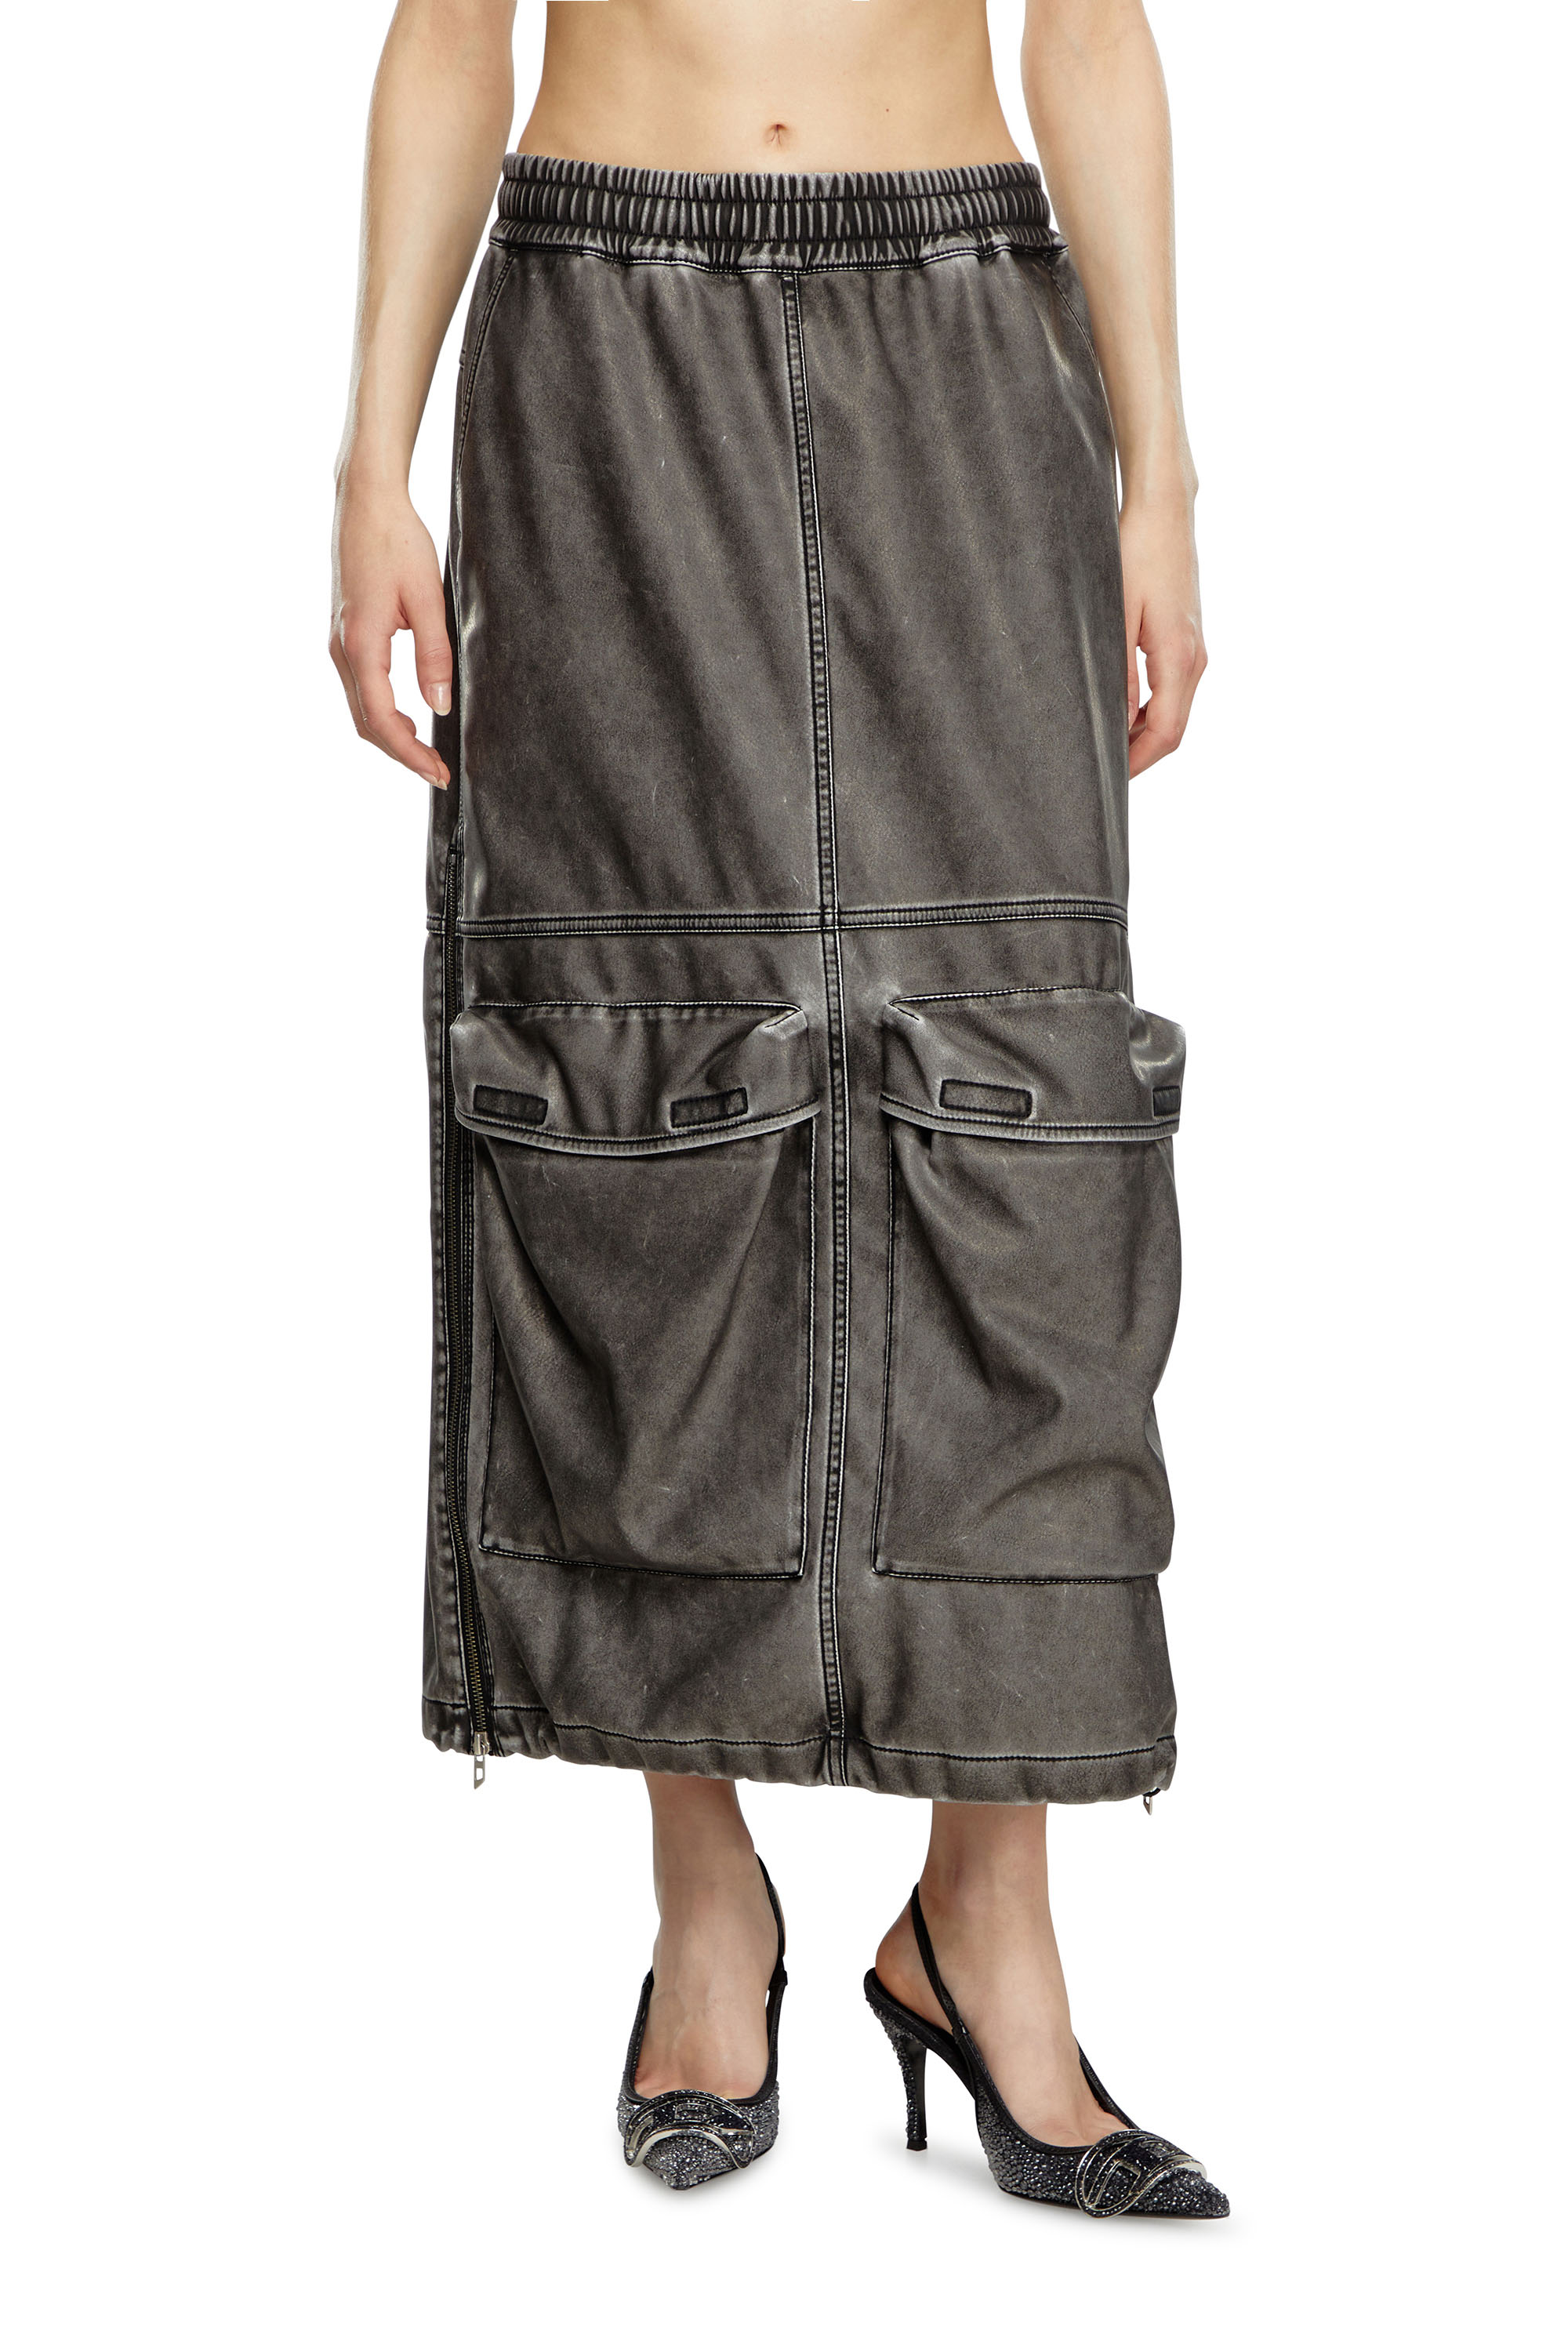 Diesel - O-DYSSEY-P1, Woman Long skirt in washed tech fabric in Grey - Image 1